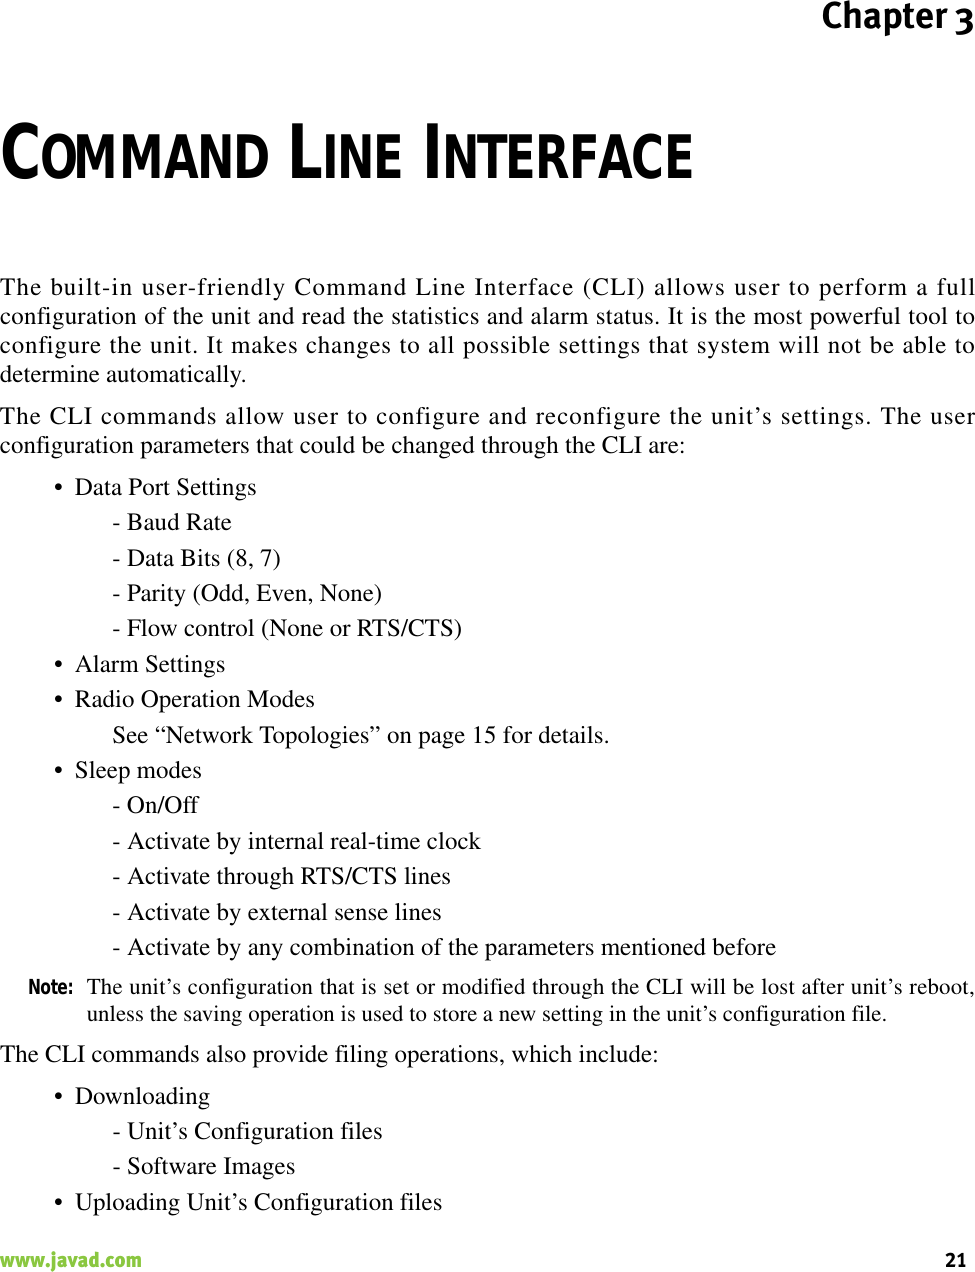 Chapter 321www.javad.com                                                                                                                                                    COMMAND LINE INTERFACEThe built-in user-friendly Command Line Interface (CLI) allows user to perform a fullconfiguration of the unit and read the statistics and alarm status. It is the most powerful tool toconfigure the unit. It makes changes to all possible settings that system will not be able todetermine automatically.The CLI commands allow user to configure and reconfigure the unit’s settings. The userconfiguration parameters that could be changed through the CLI are:• Data Port Settings- Baud Rate- Data Bits (8, 7)- Parity (Odd, Even, None)- Flow control (None or RTS/CTS)• Alarm Settings• Radio Operation ModesSee “Network Topologies” on page 15 for details.• Sleep modes- On/Off- Activate by internal real-time clock- Activate through RTS/CTS lines- Activate by external sense lines- Activate by any combination of the parameters mentioned beforeNote: The unit’s configuration that is set or modified through the CLI will be lost after unit’s reboot,unless the saving operation is used to store a new setting in the unit’s configuration file.The CLI commands also provide filing operations, which include:• Downloading- Unit’s Configuration files- Software Images• Uploading Unit’s Configuration files